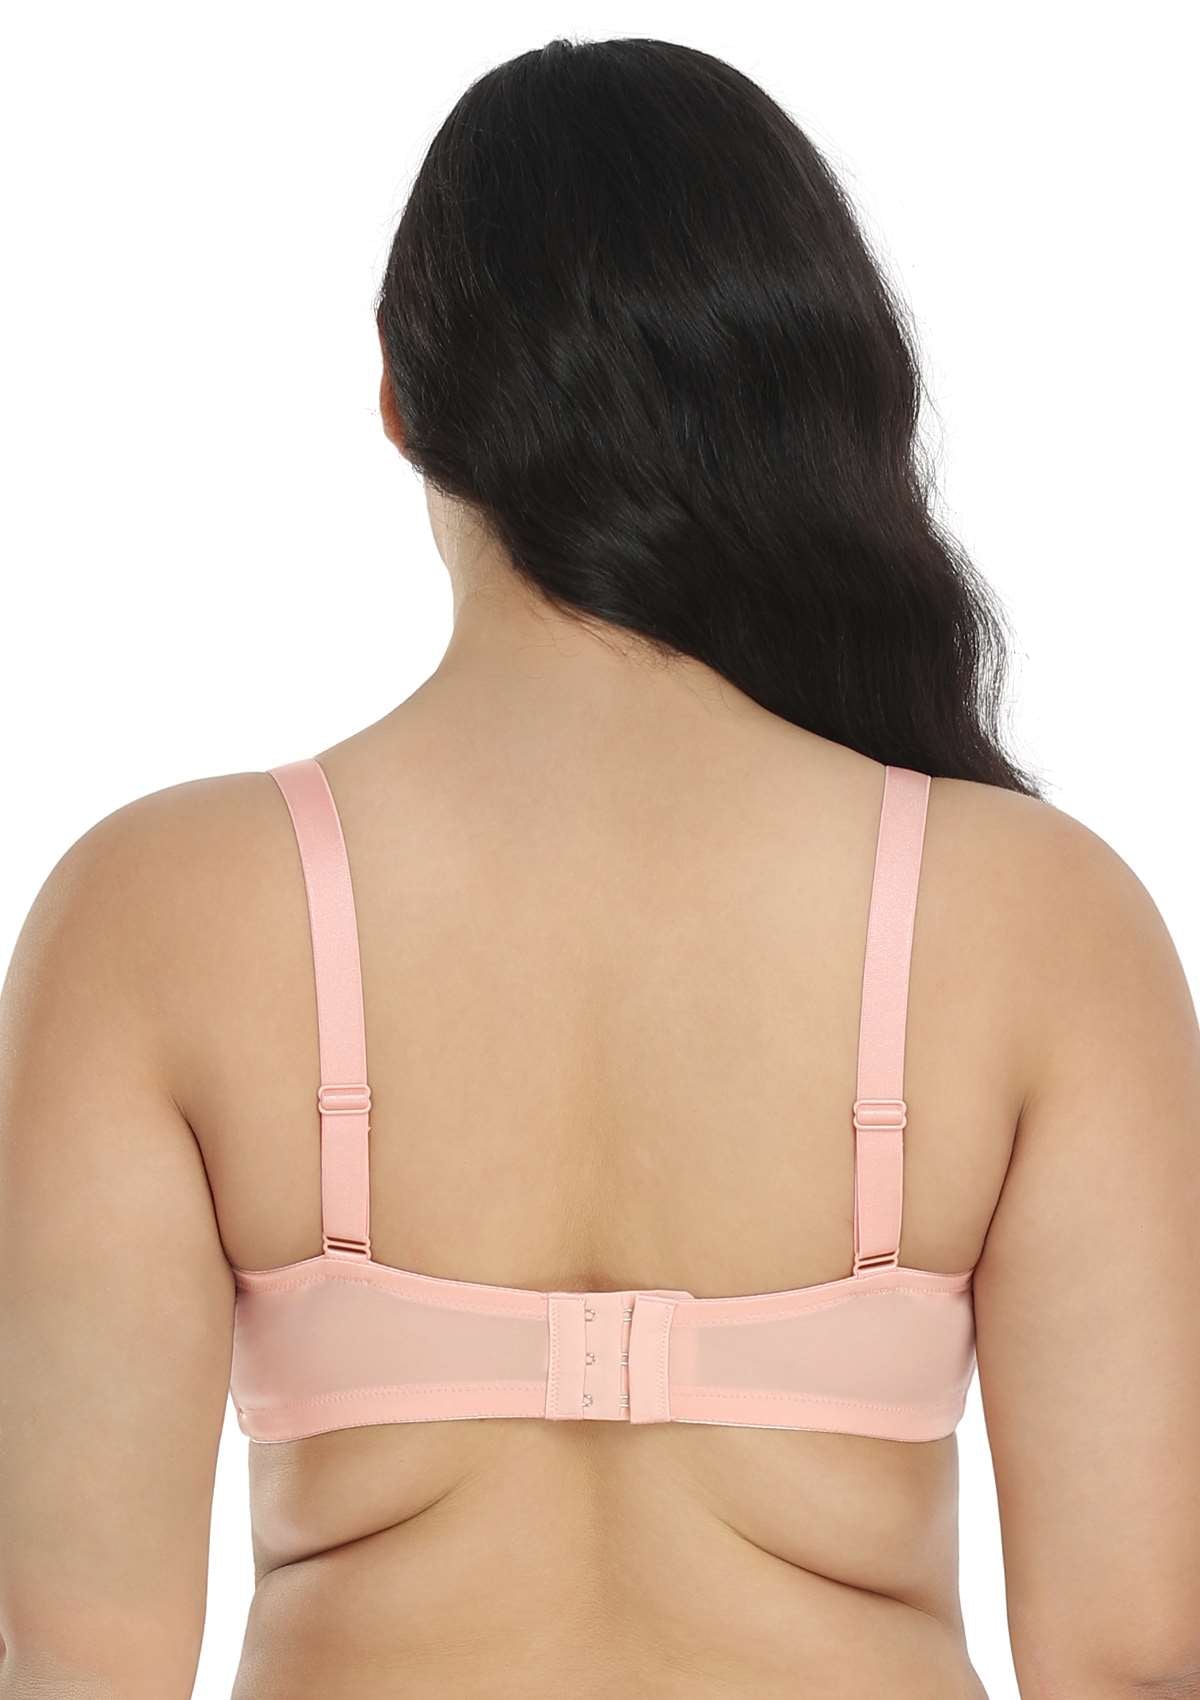 HSIA Rosa Bonica Sheer Lace Mesh Unlined Thin Comfy Woman Bra - Pink / 36 / D